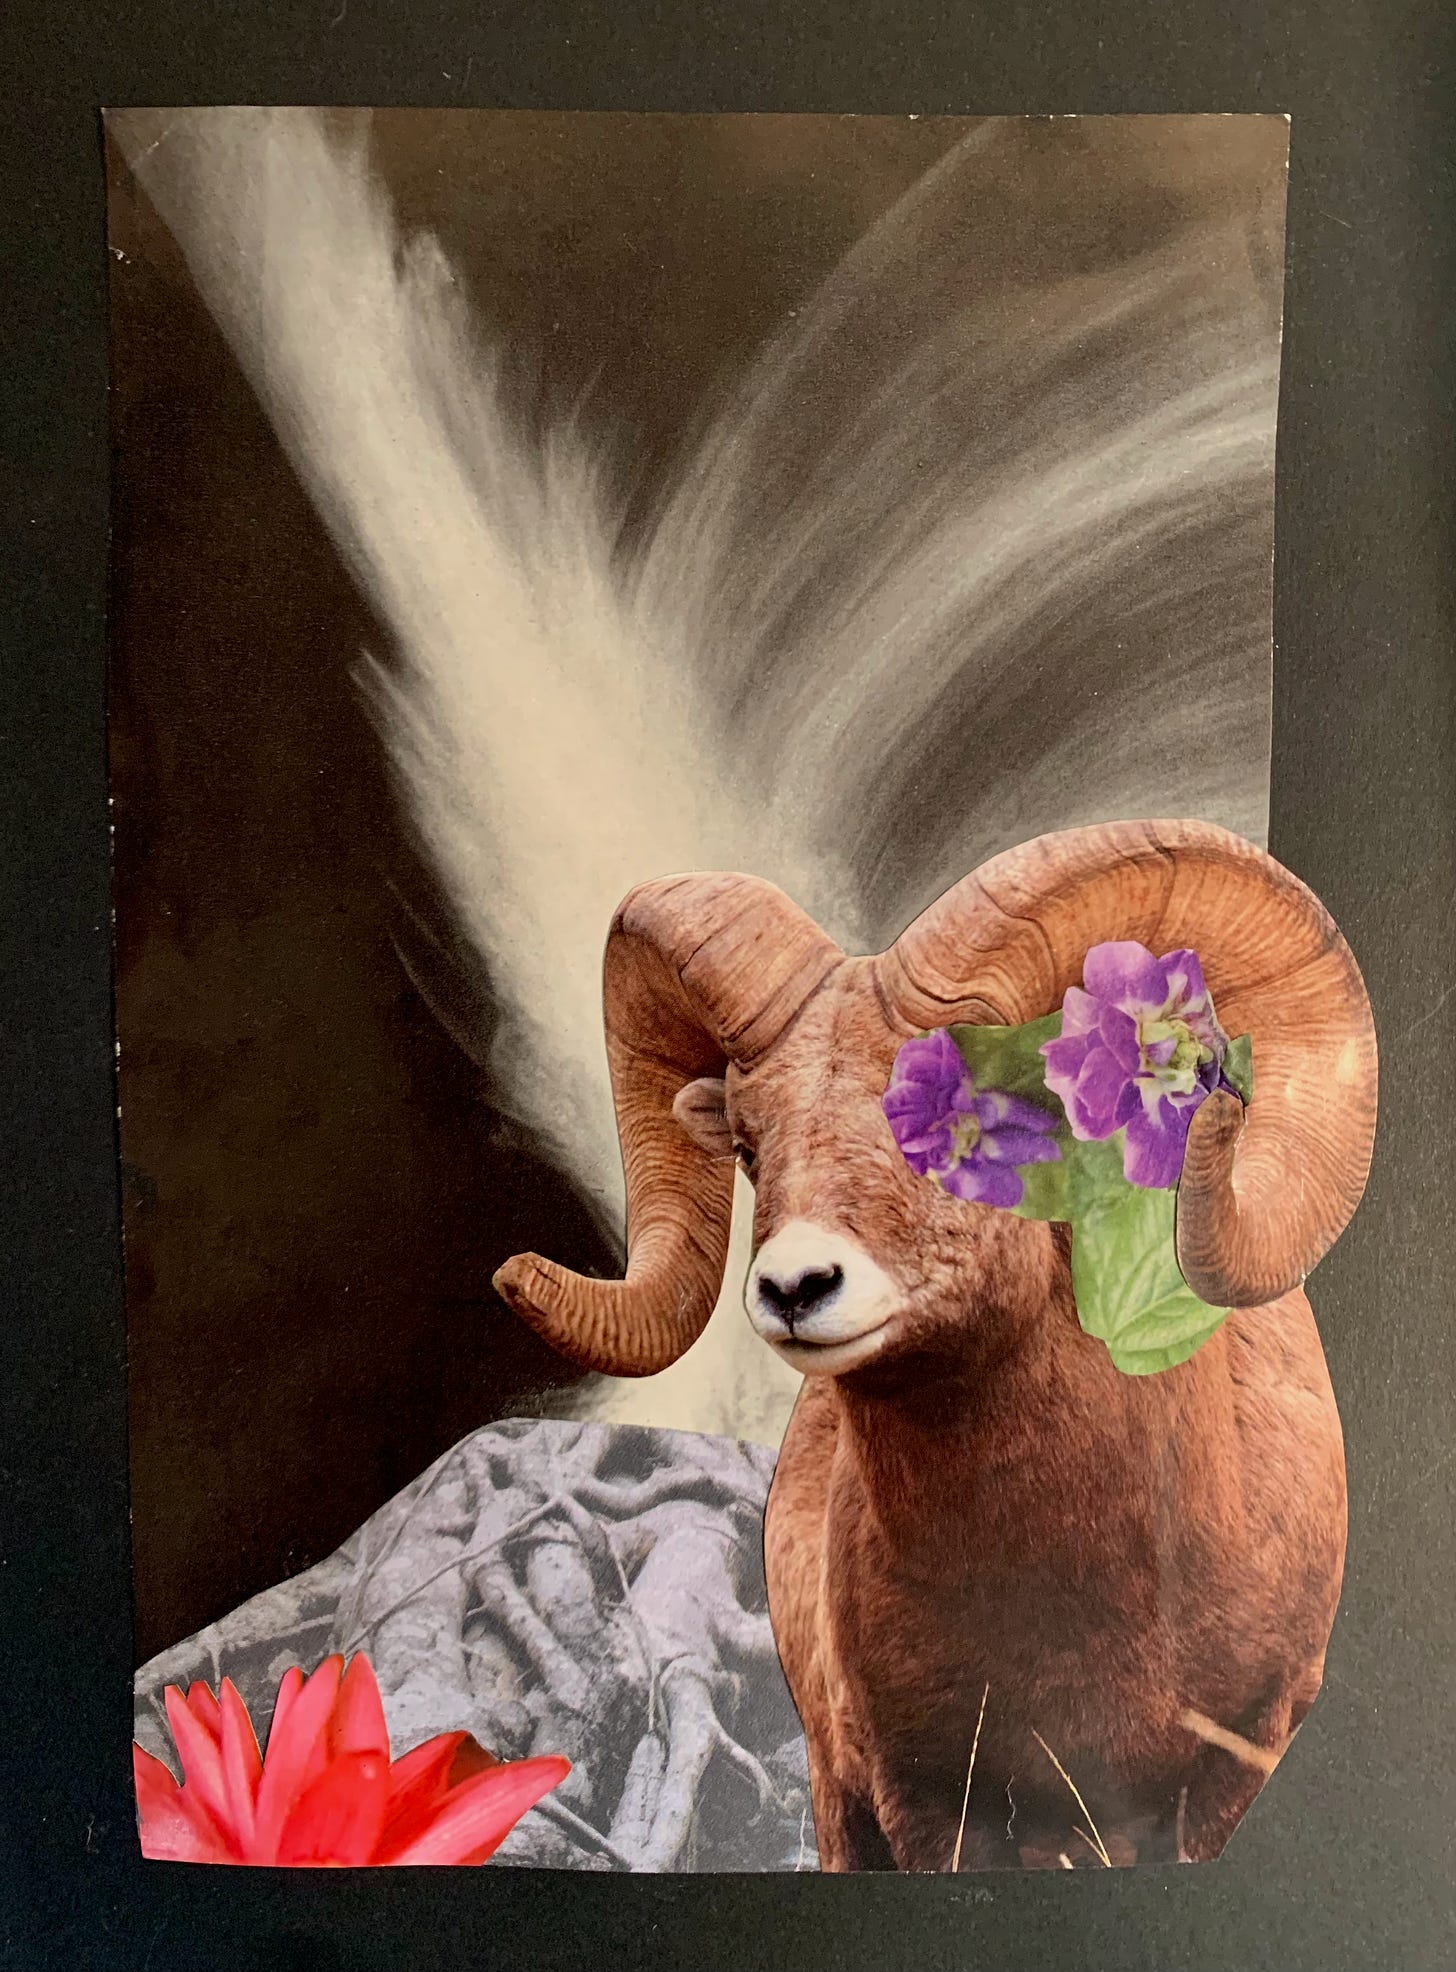 Paper cut collage depicting a bighorn sheep in front of a black and white image of a fire. The fire is situated above a set of roots and purple violets obscure the sheep's left eye.